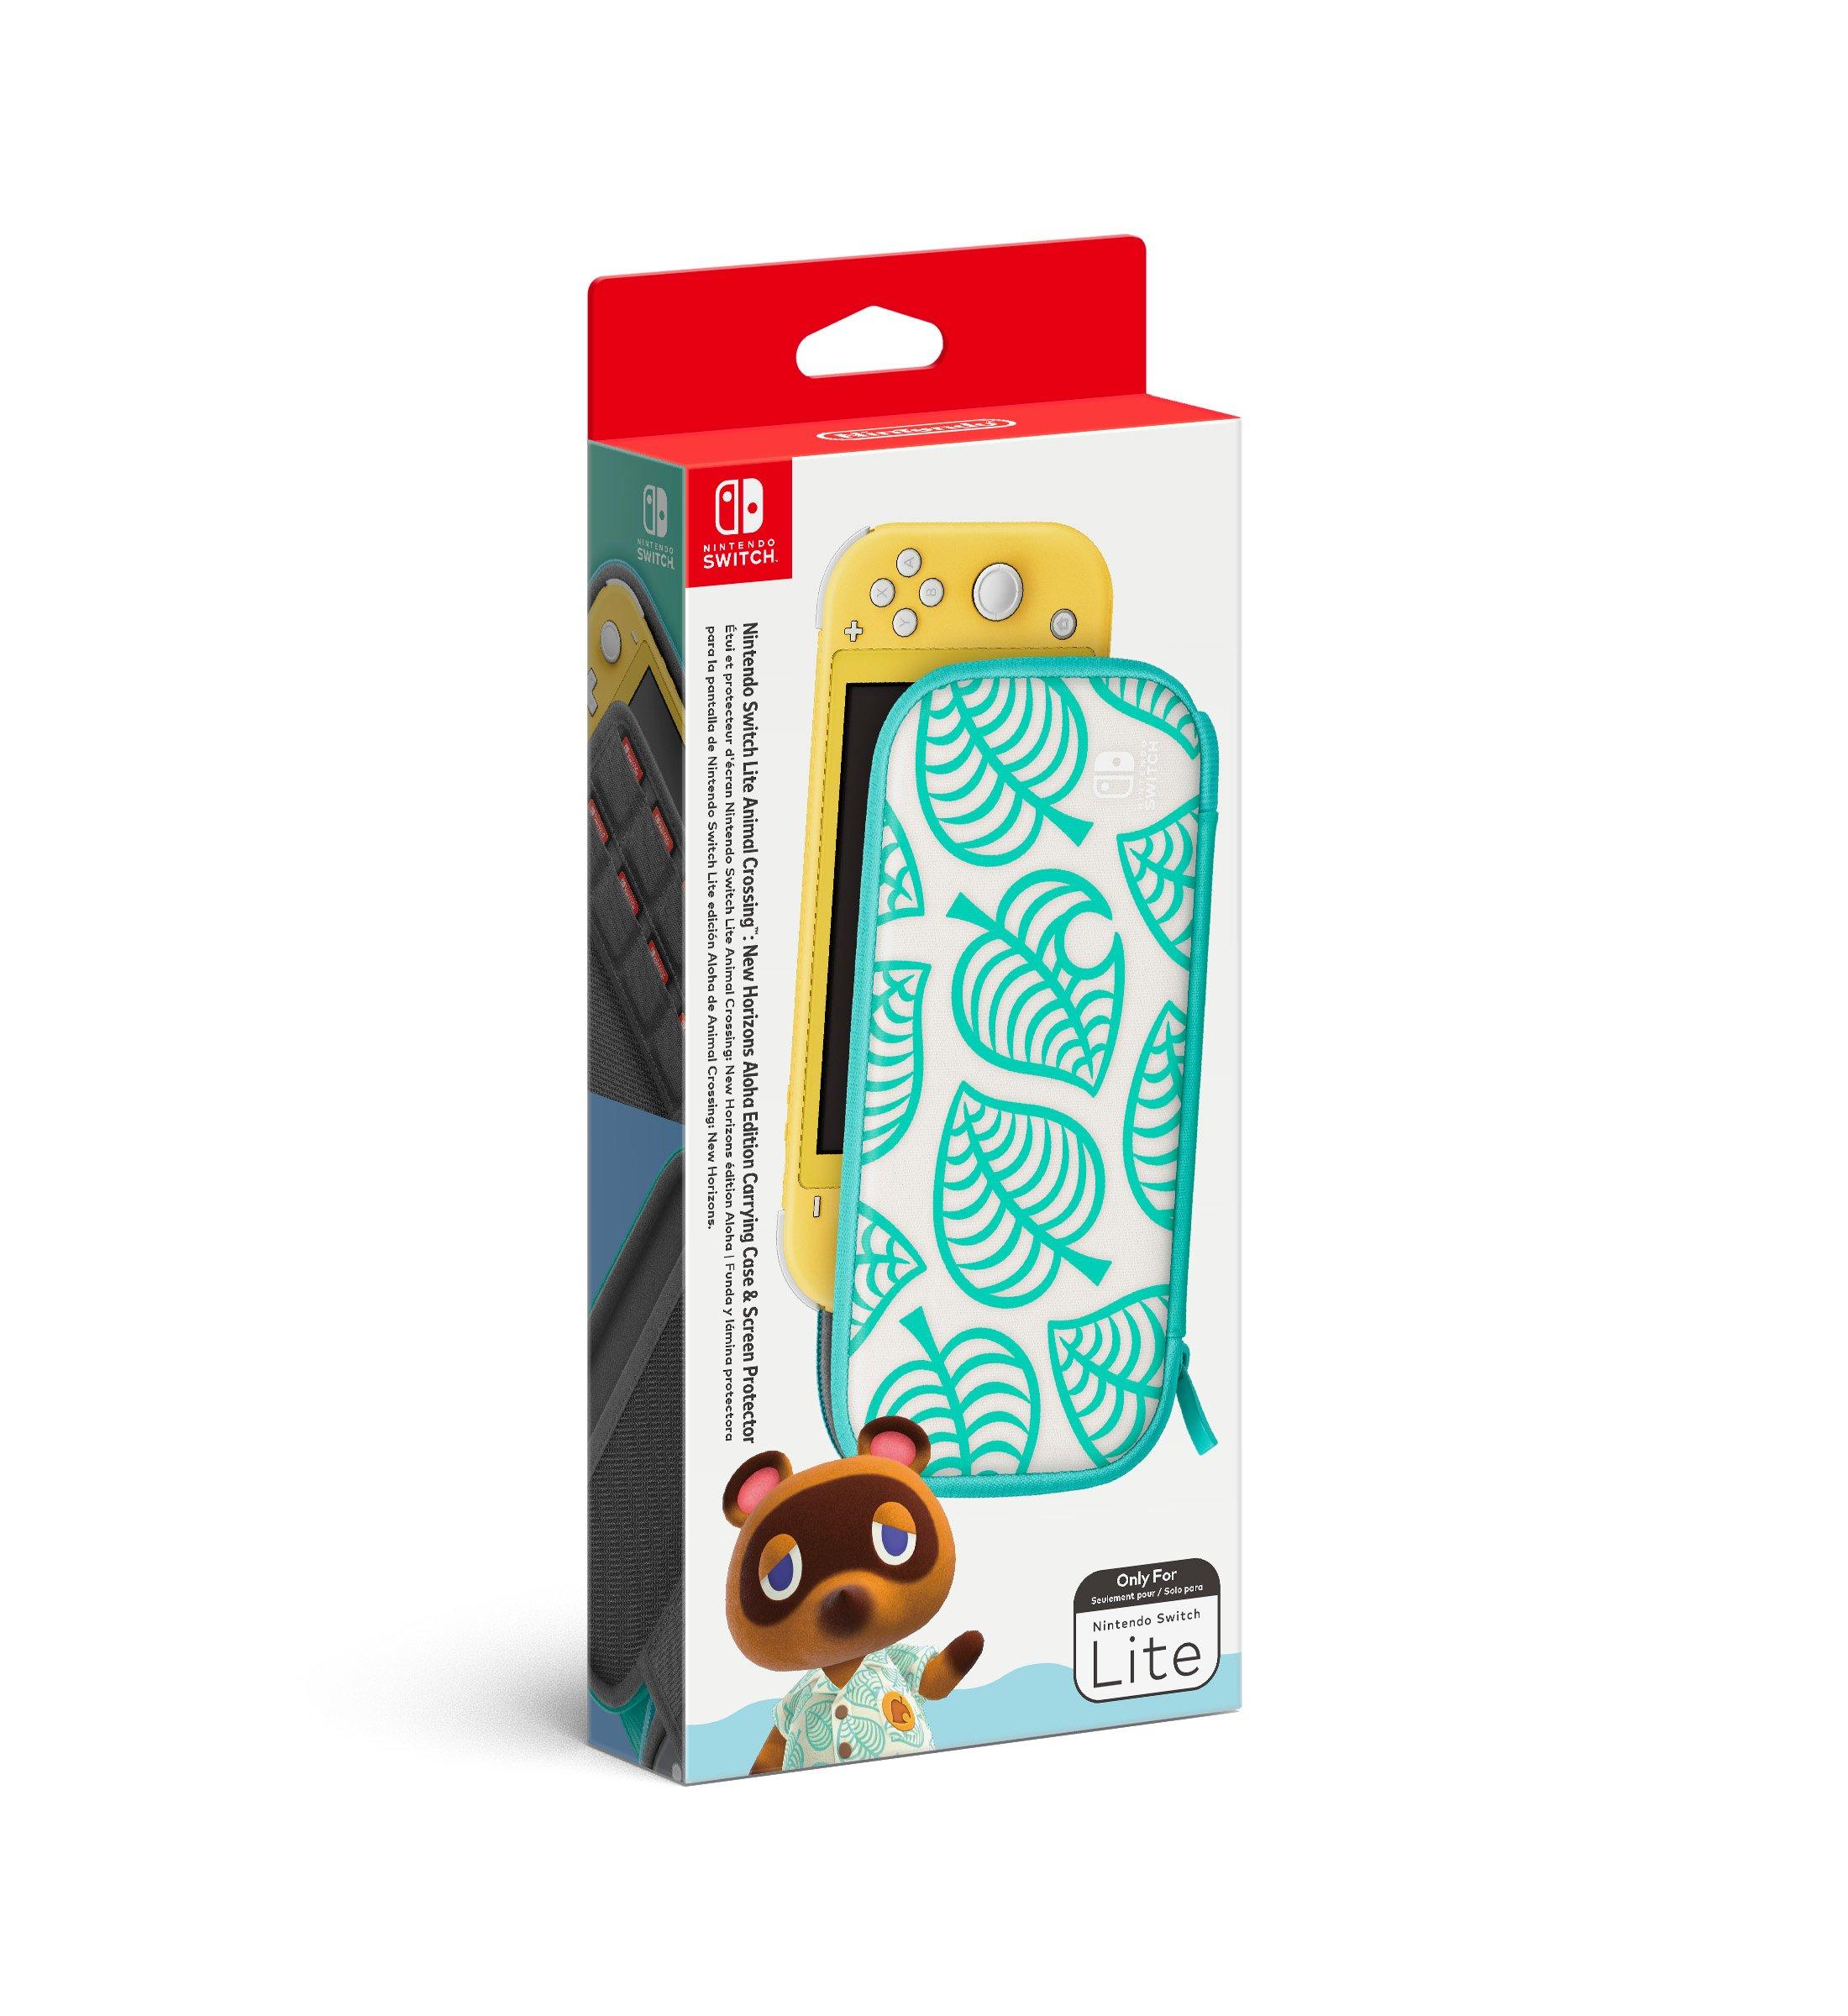 Nintendo Switch Lite Carrying Case (Animal Crossing: New